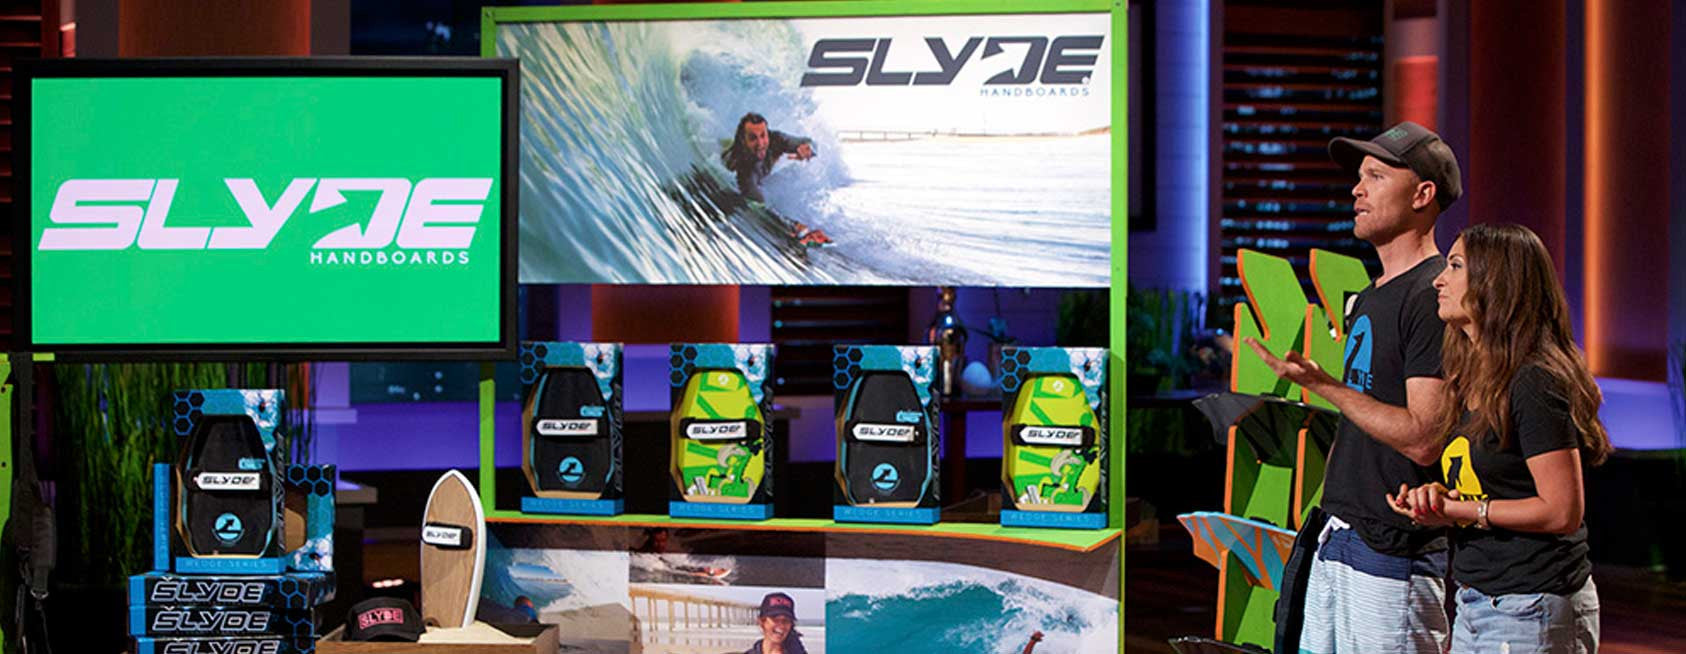 Breaking News: Slyde Handboards Pitches on ABC’s Shark Tank April 15th 2016